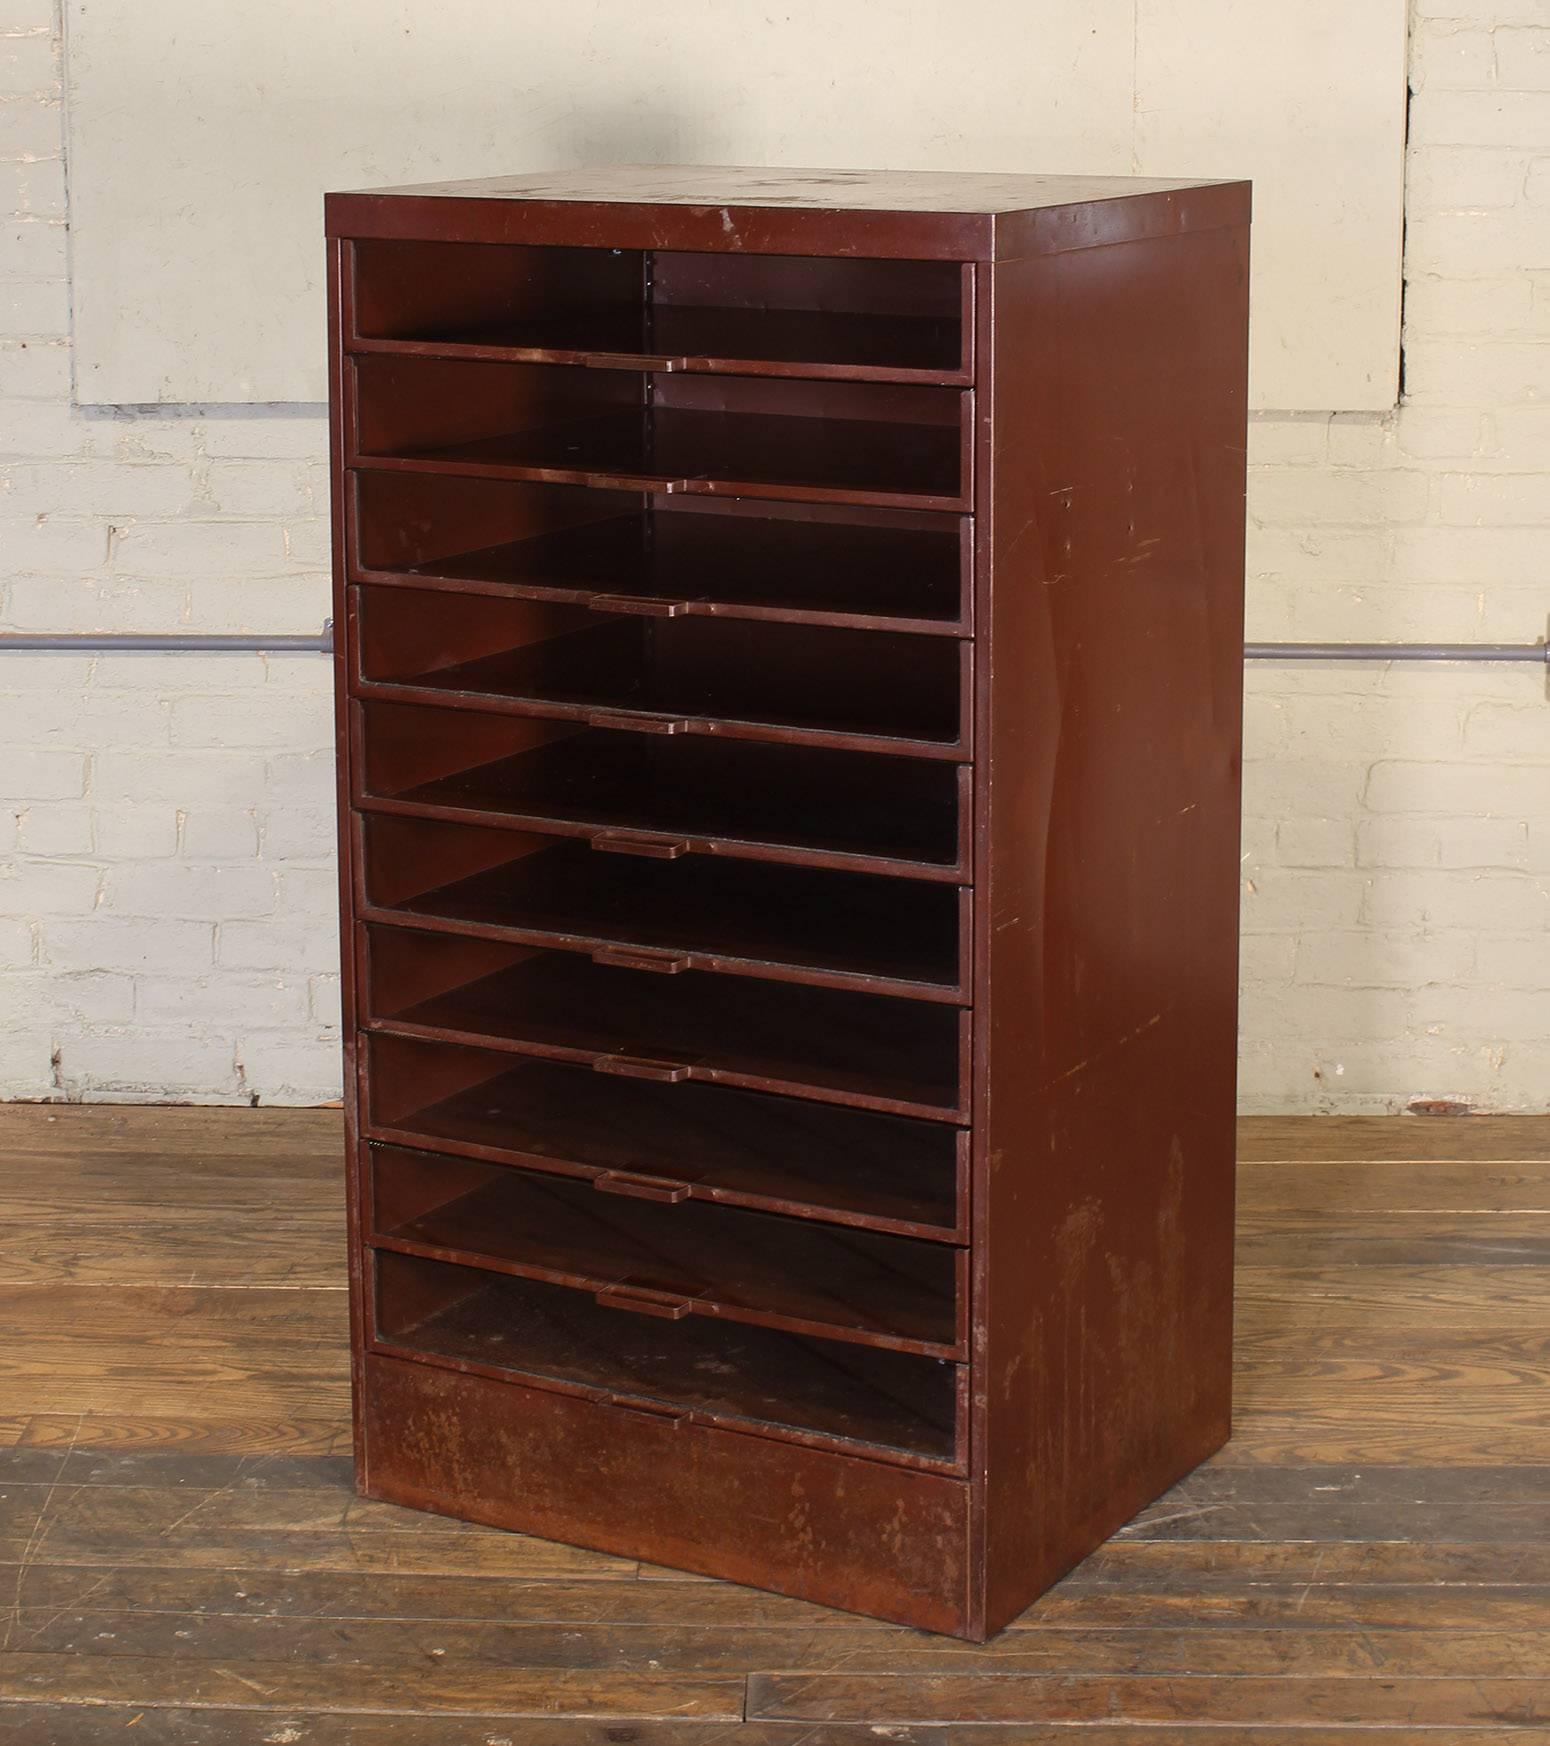 metal storage cabinet with drawers